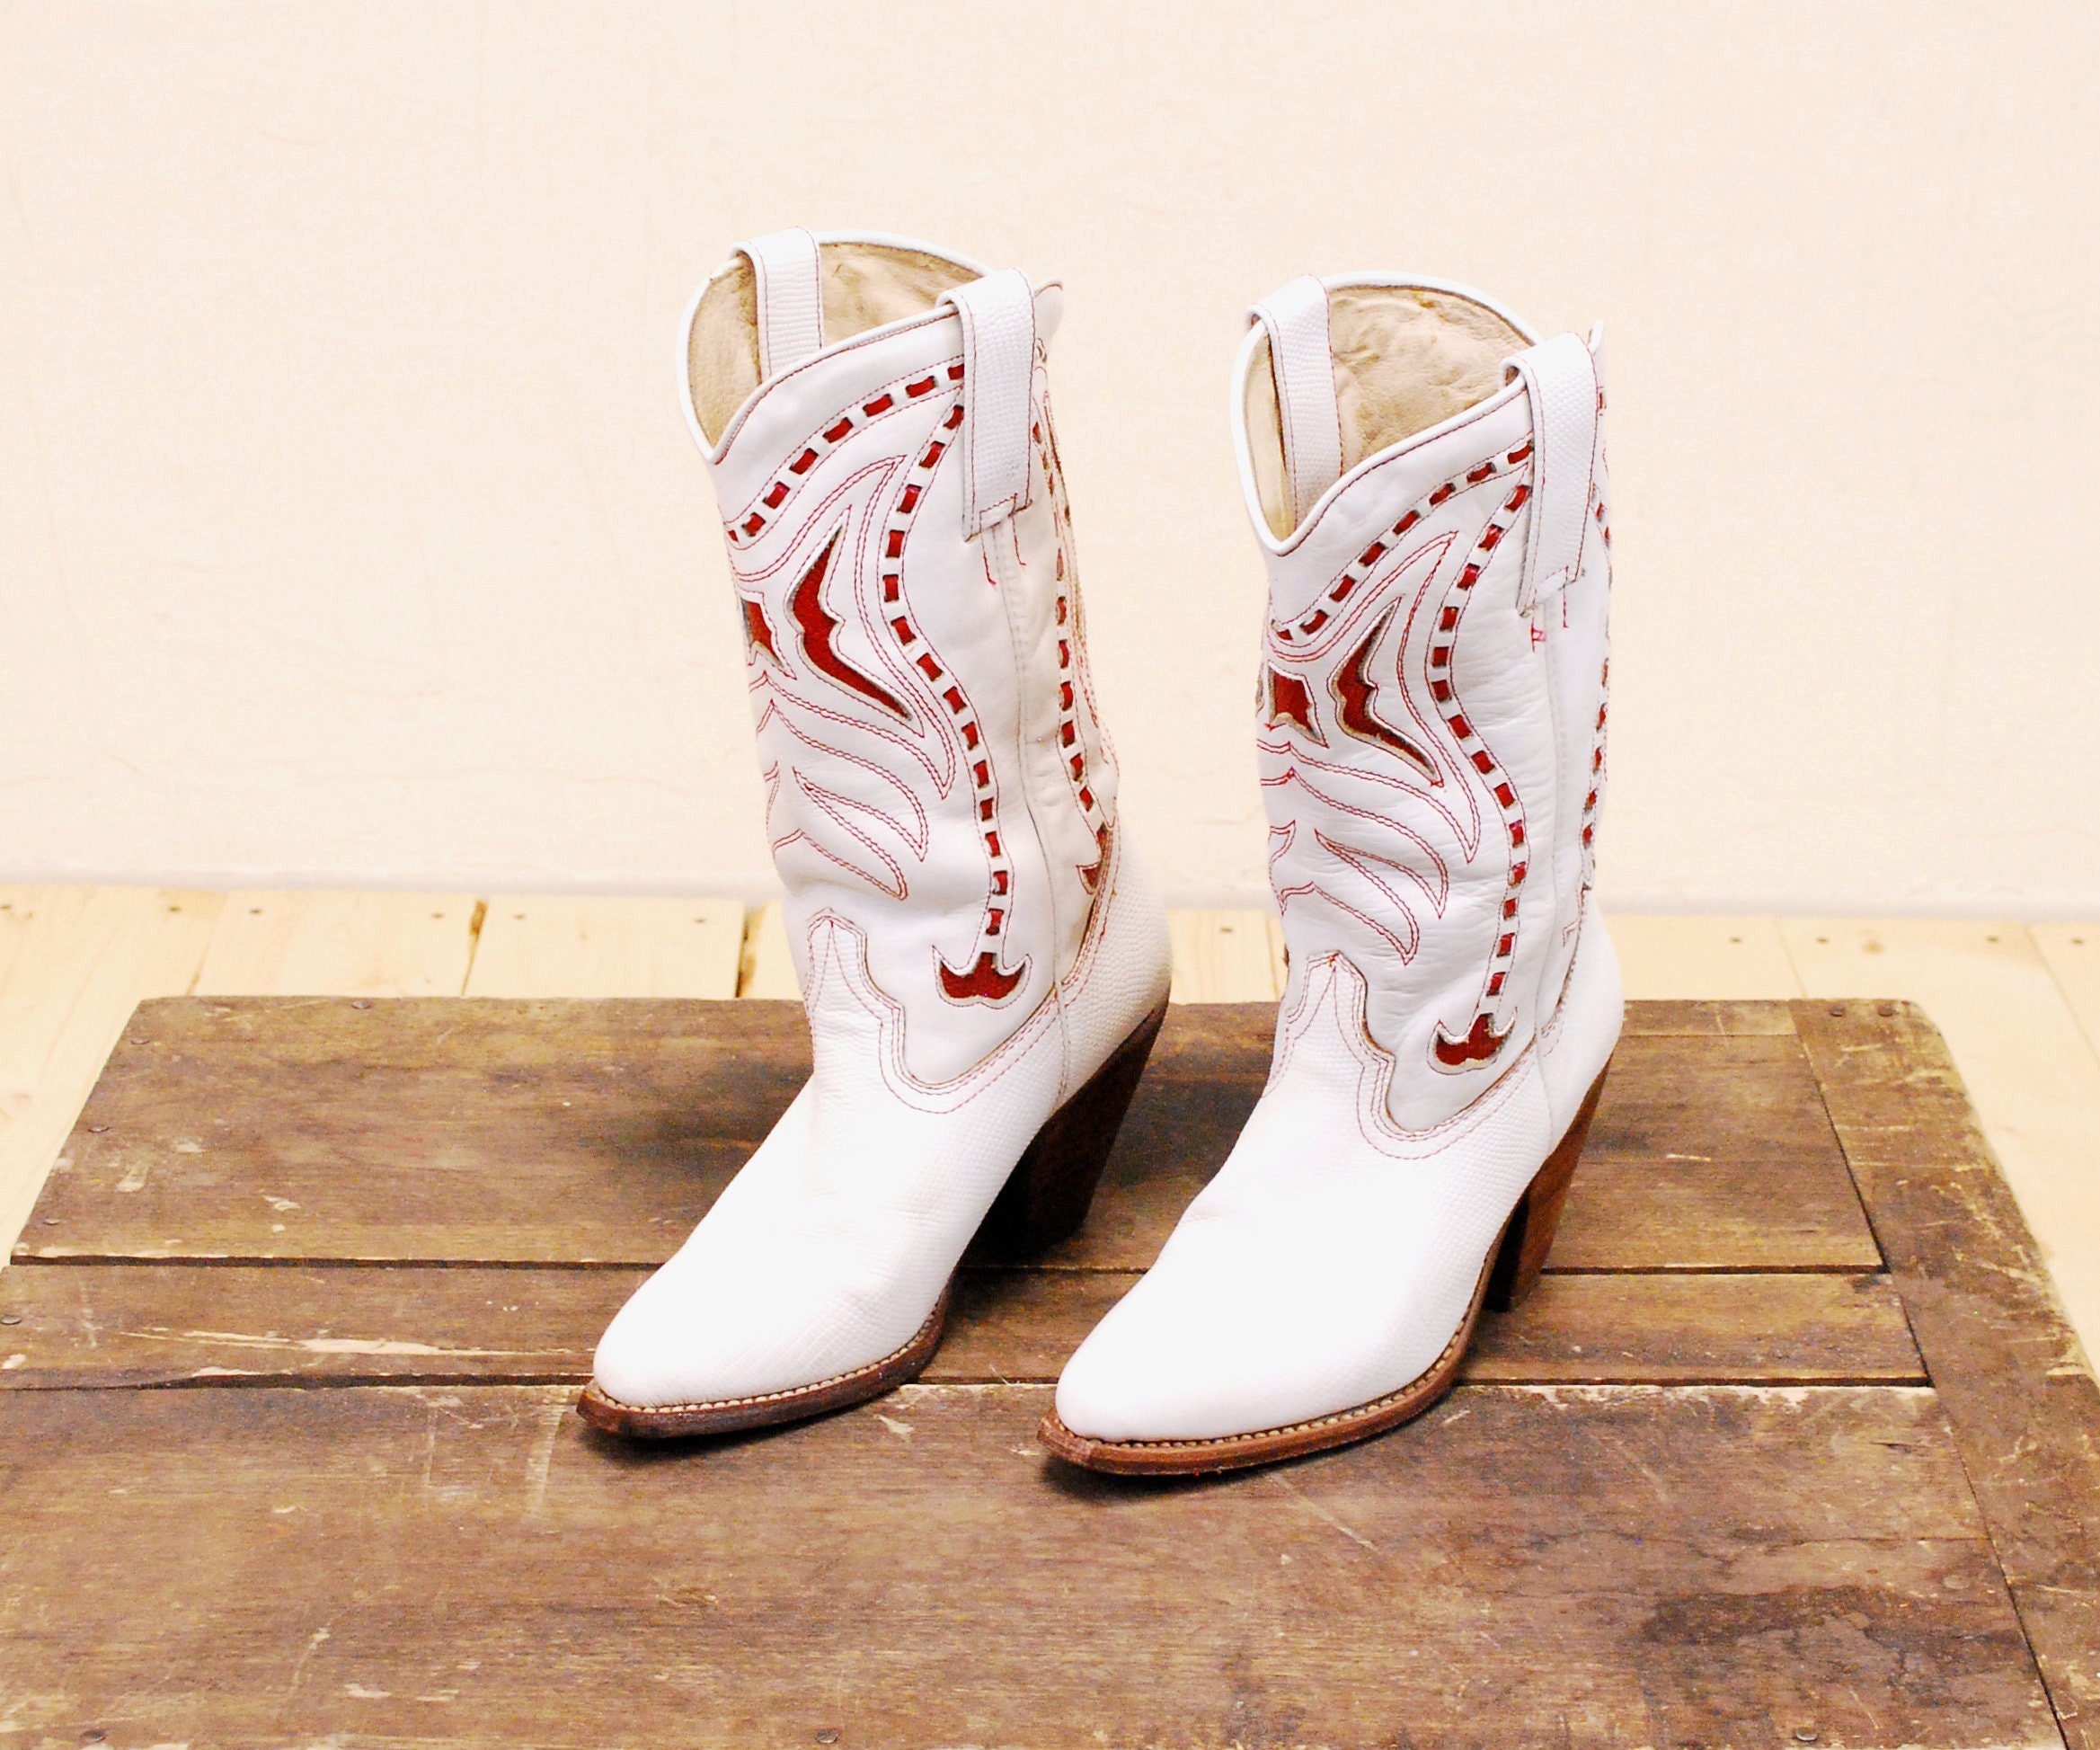 Shoes Womens Shoes Boots Cowboy & Western Boots Vintage 70s White Silver Snake Print Leather Under Knees Cowboy Boots With Heels And Pointed Toe Size UK 5.5 EU 39 